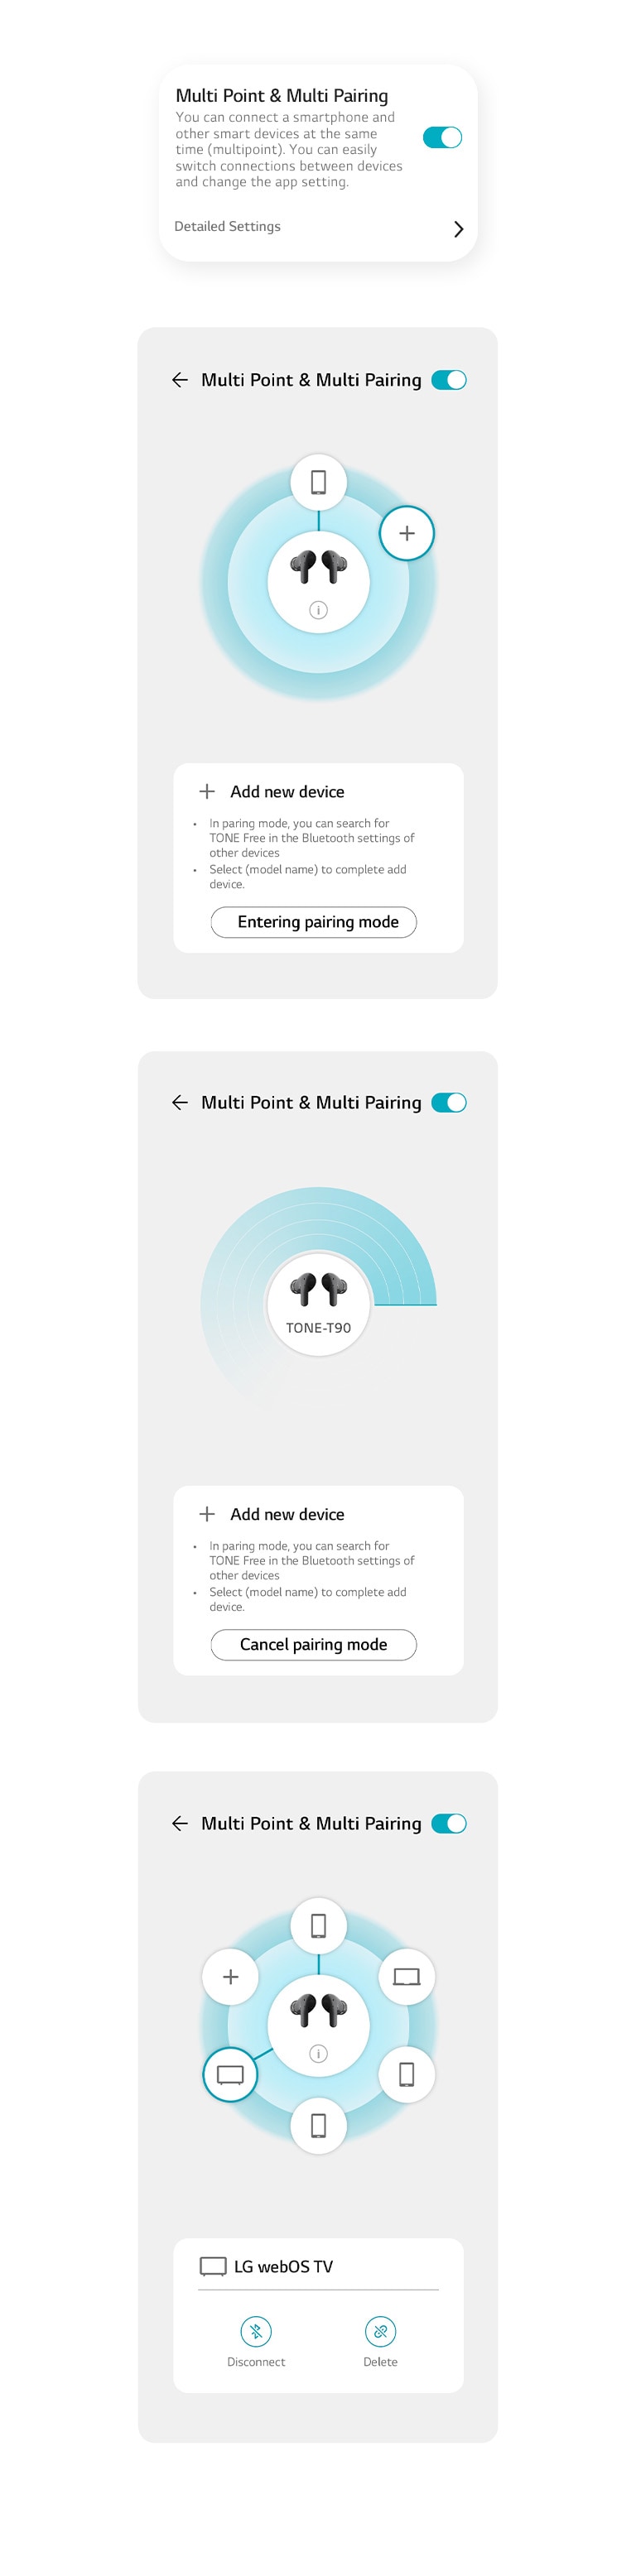 Images of the Multi Point and Multi Pairing functions on the app.